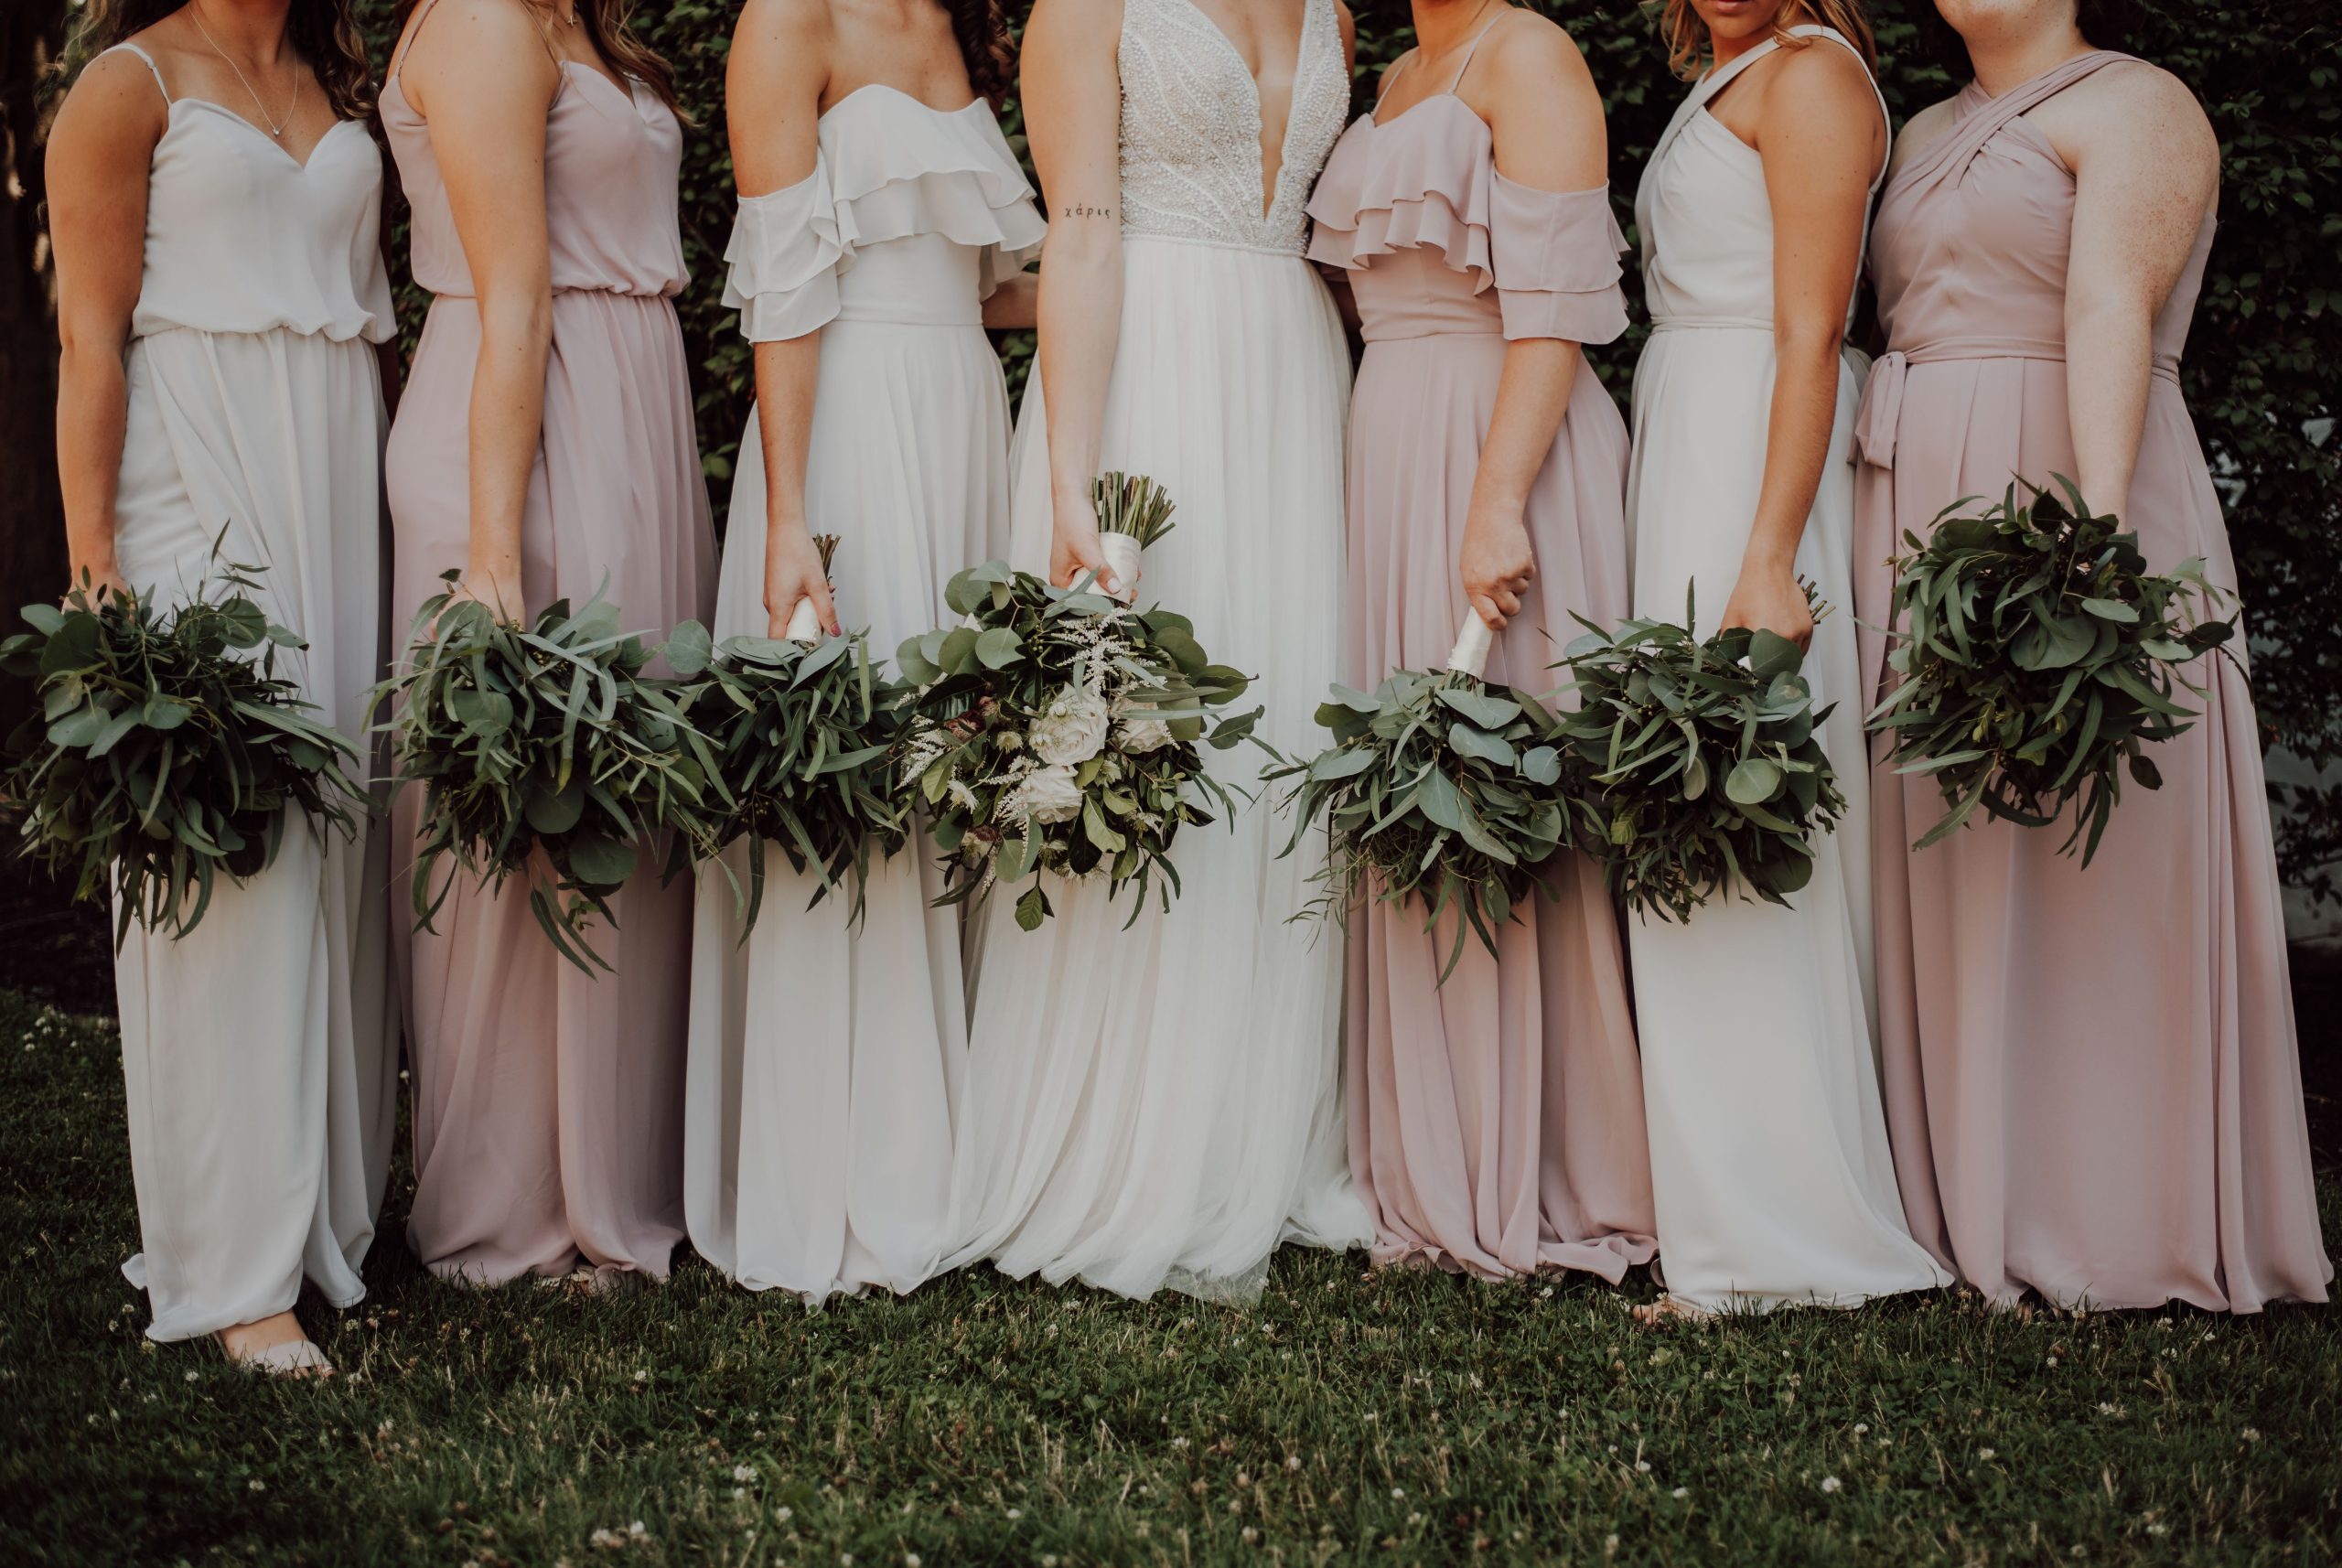 A group of bridesmaids stand in line, oriented towards a bride in the center